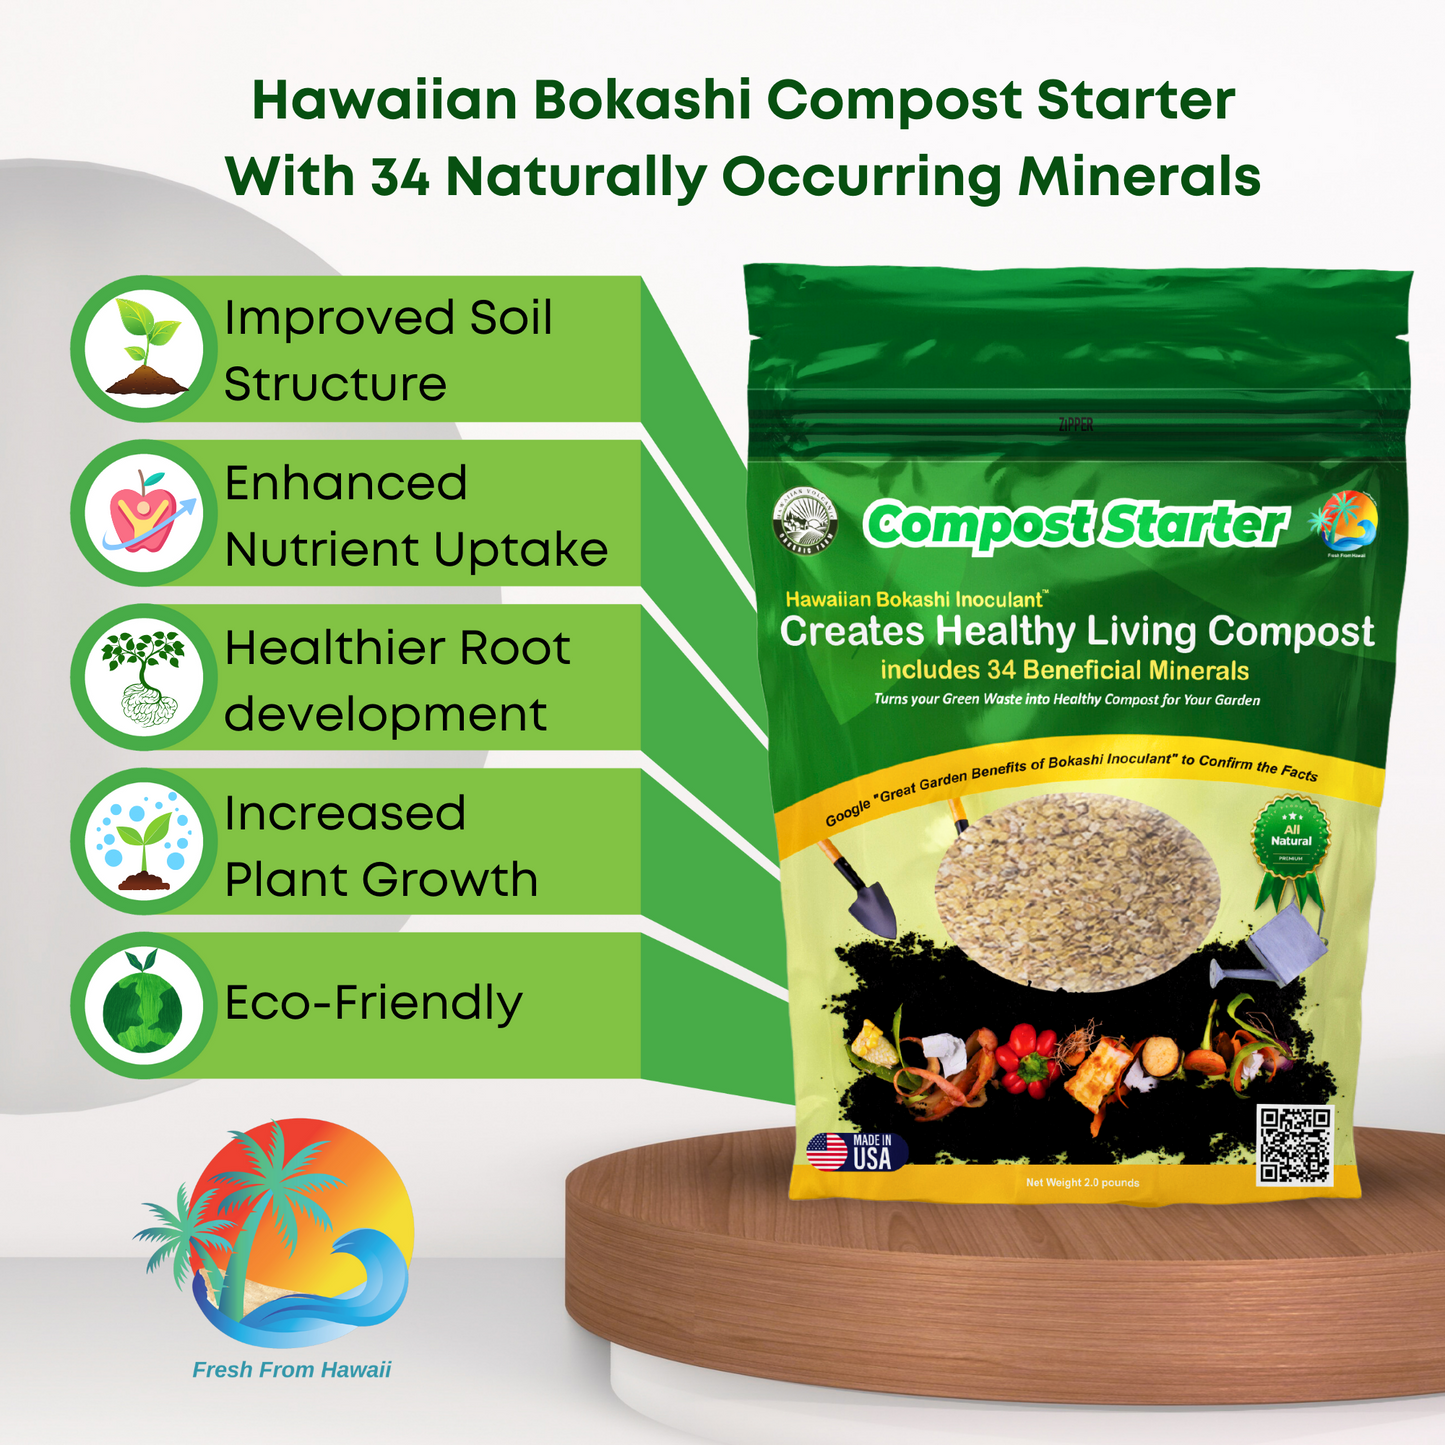 Hawaiian Bokashi Compost Starter with 34 Naturally Occurring Minerals